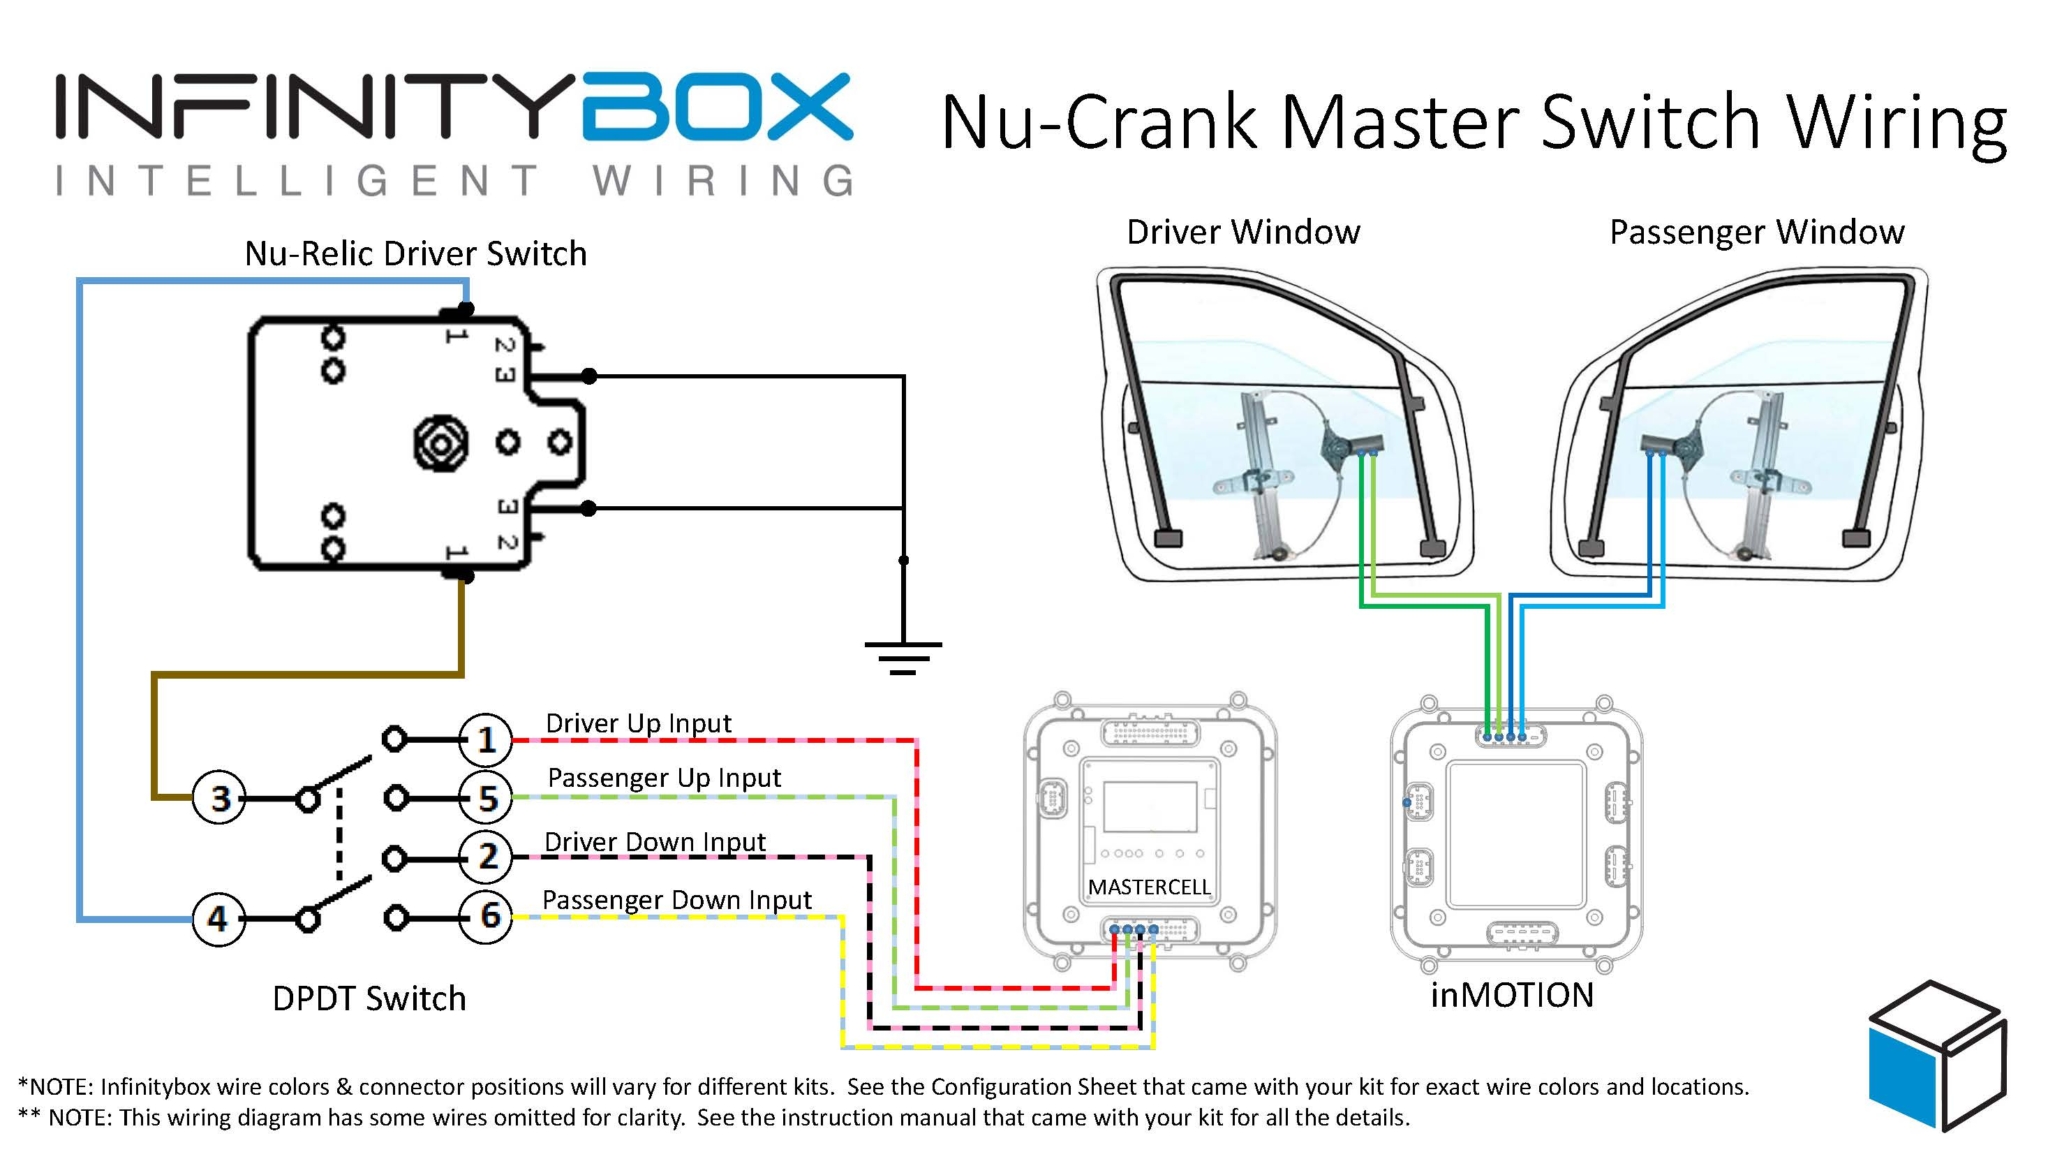 Picture of wiring diagram showing how to wire the Nu-Relic Nu-Crank power w...